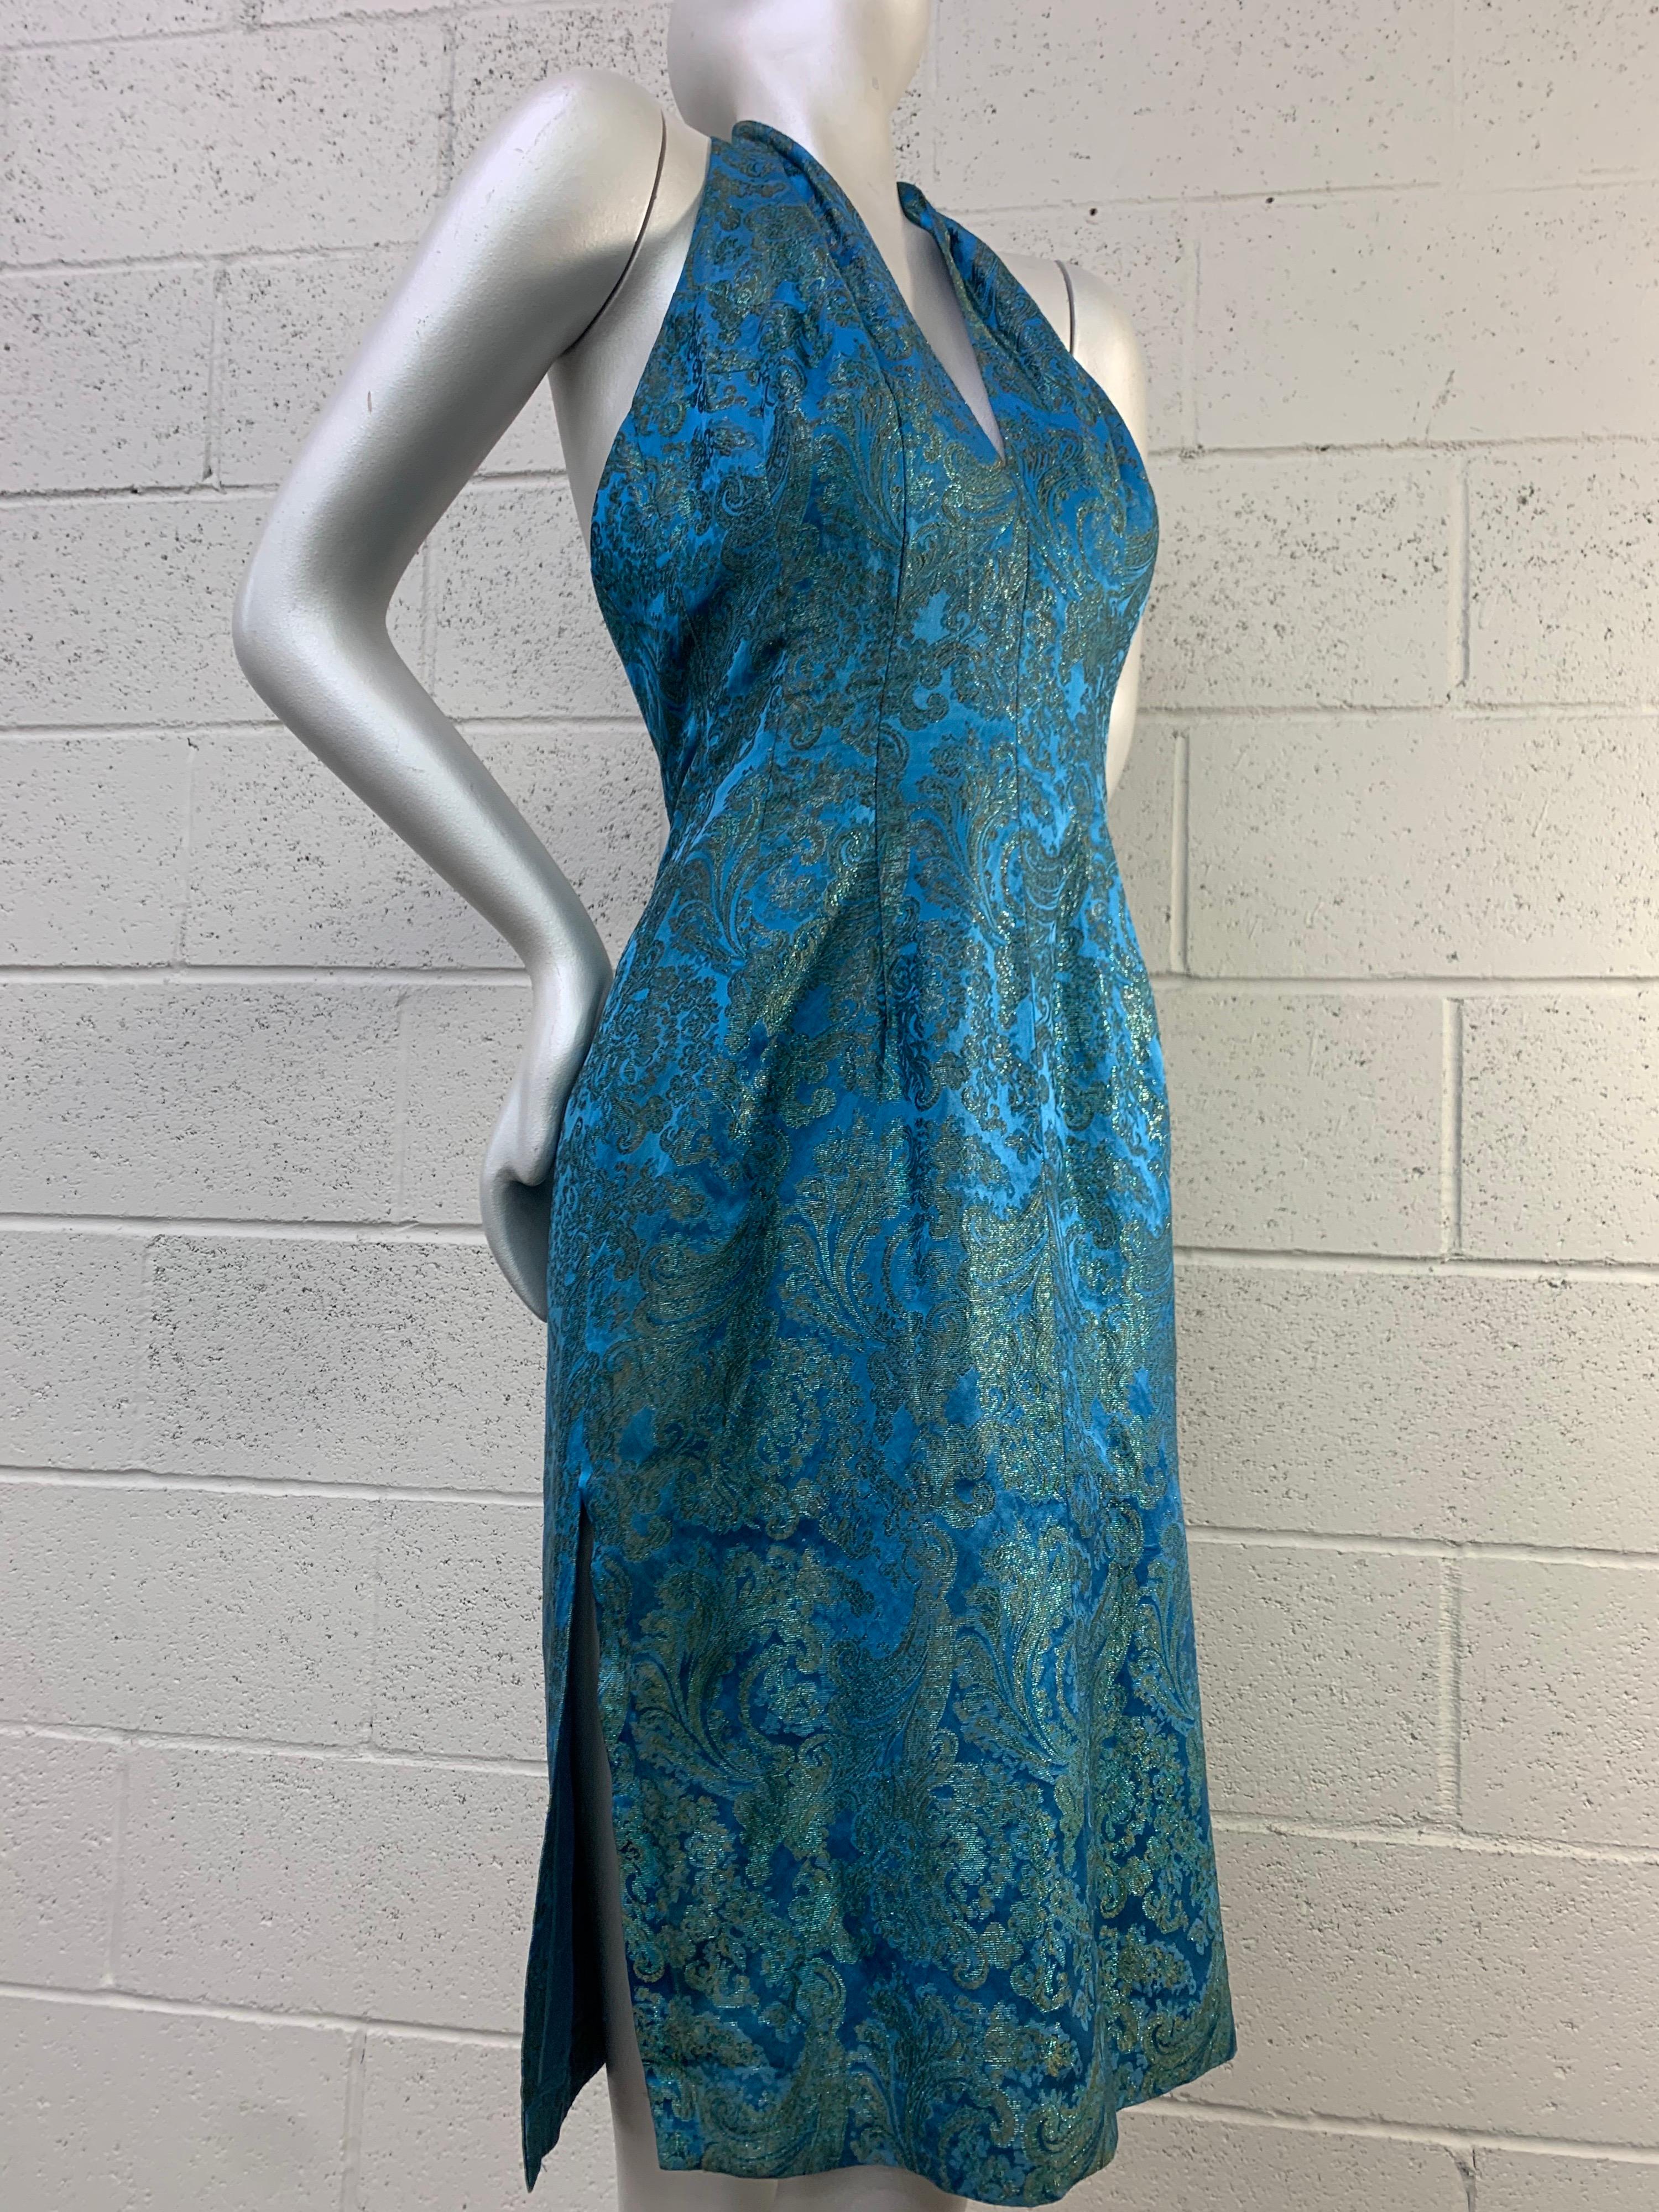 A beautiful 1950s azure silk brocade halter cocktail sheath dress and jacket ensemble attributed to Philip Hulitar with no labels present. Low-cut back and back zipper. Fully lined. Size 8. 